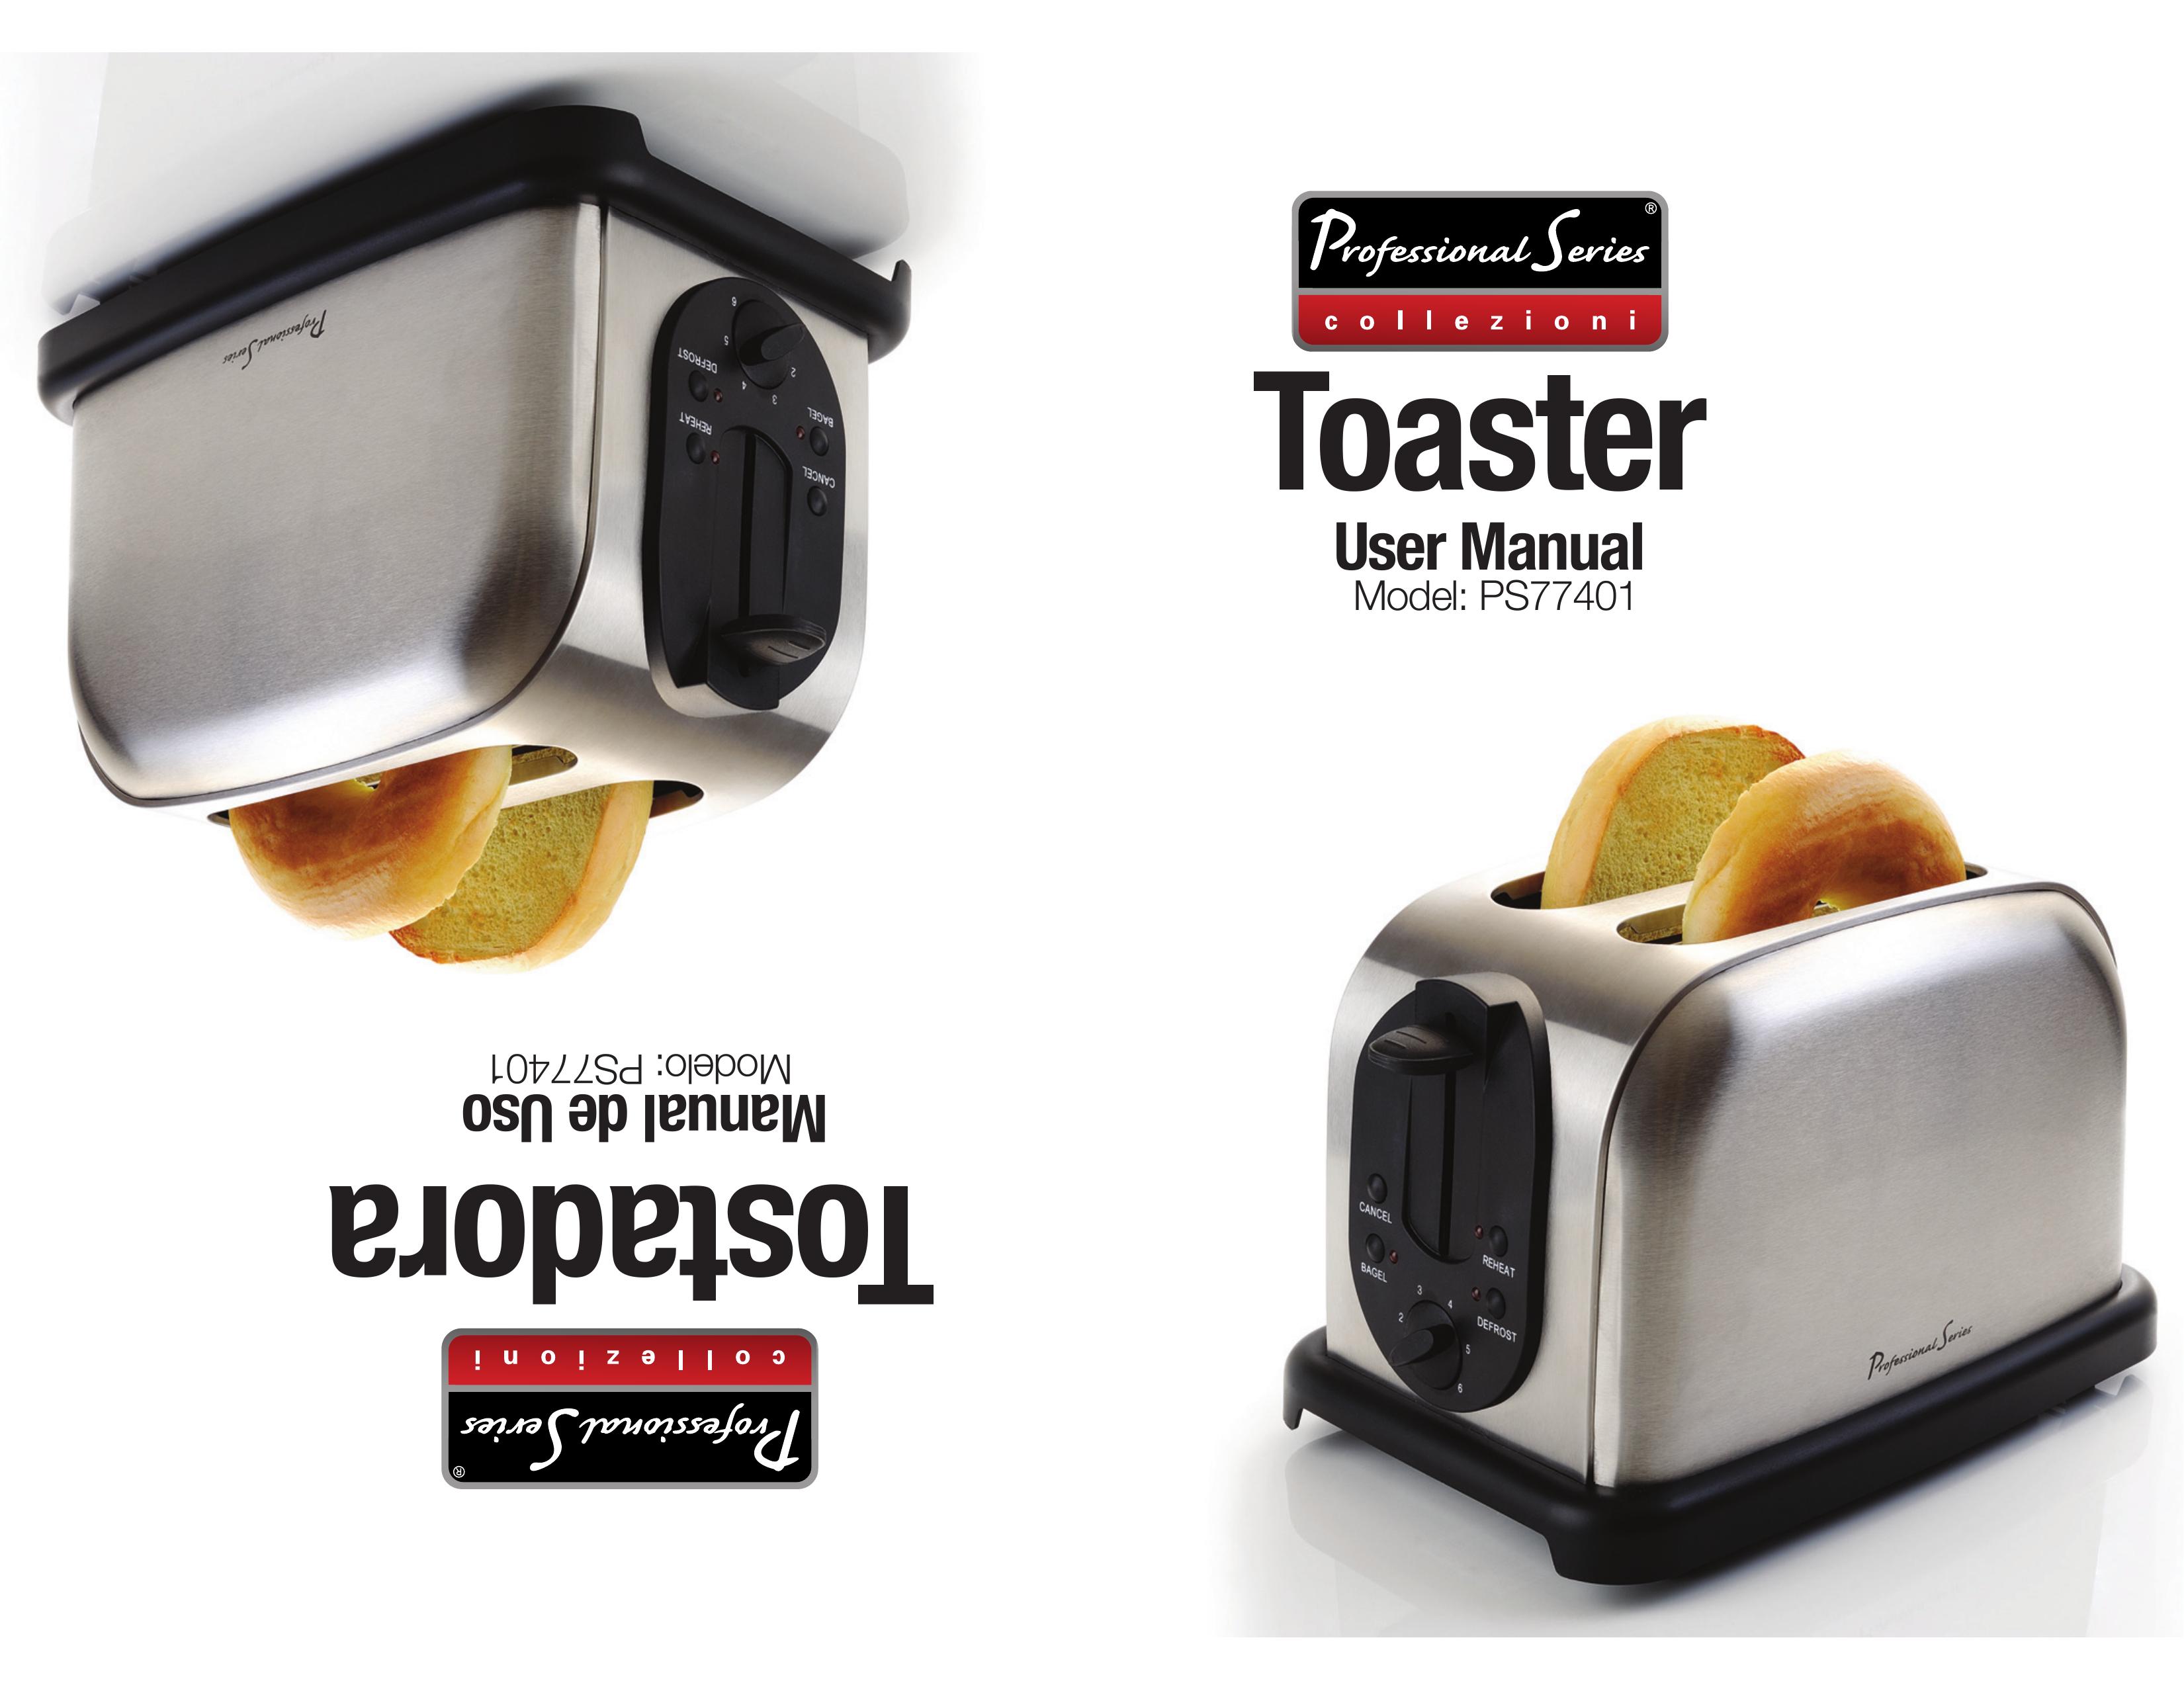 Professional Series PS77401 Toaster User Manual